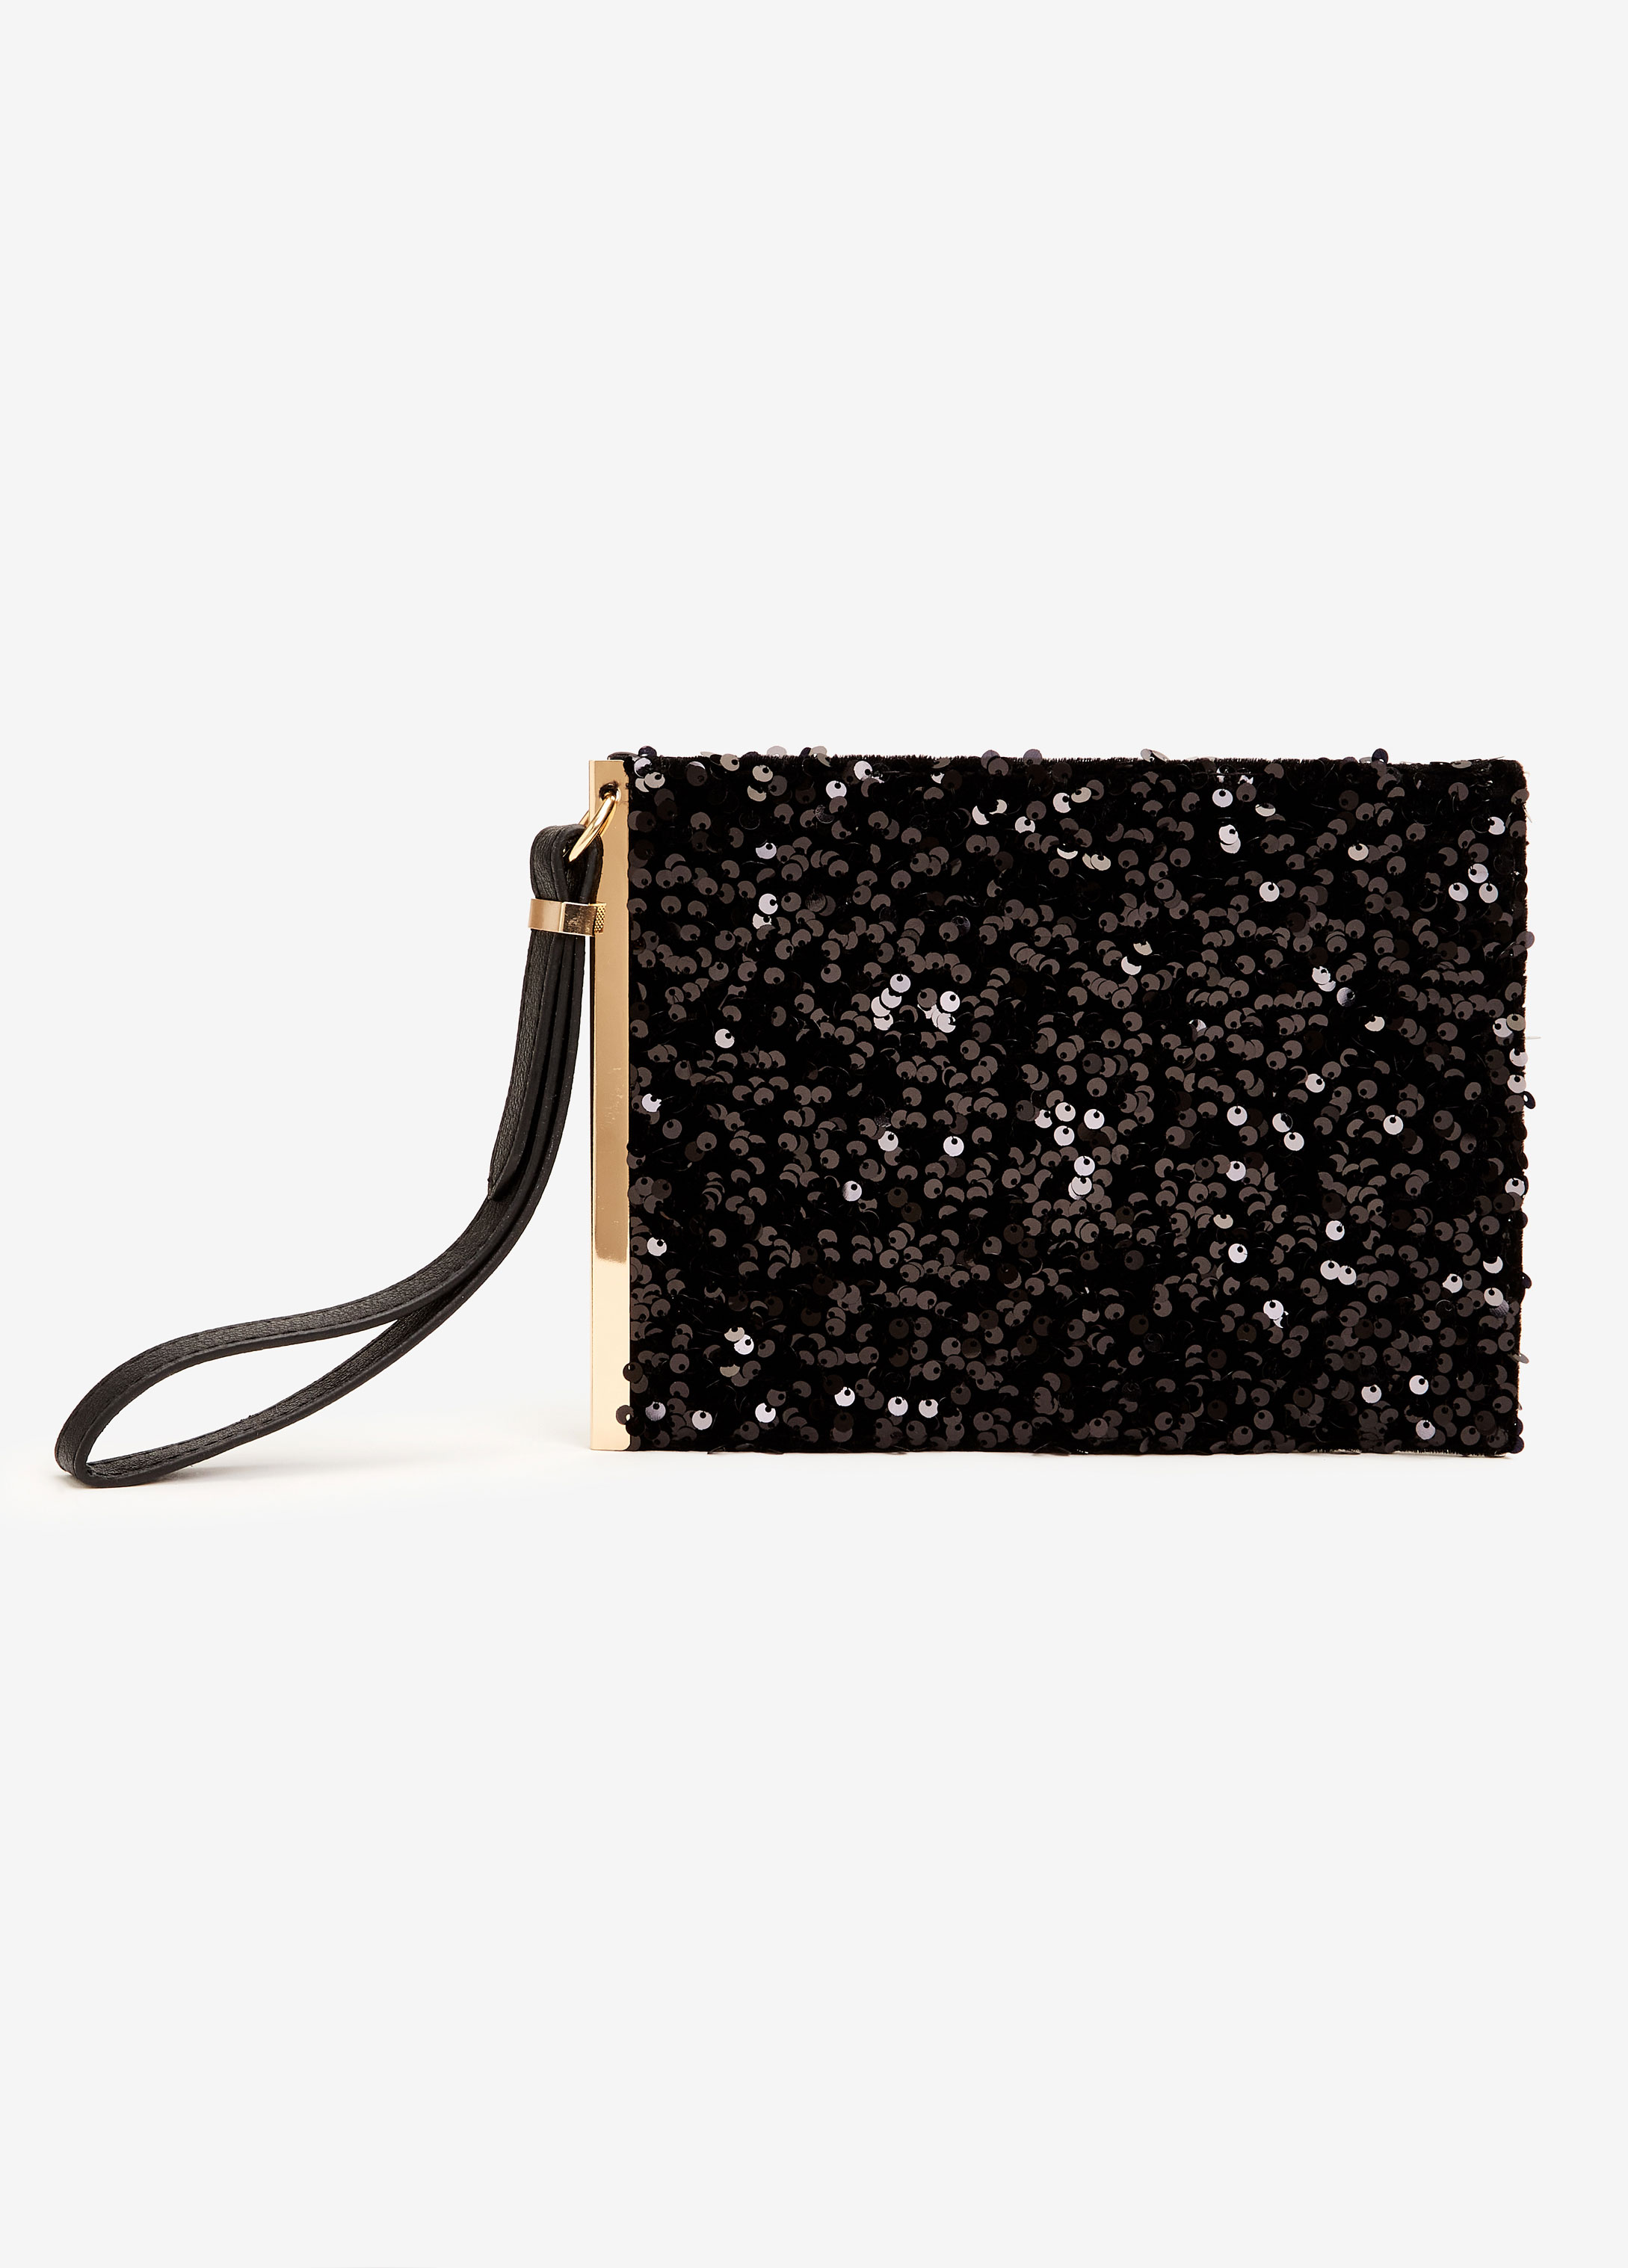 Cute Faux Leather Sequined Front Stylish Wristlet Chic Cocktail Clutch